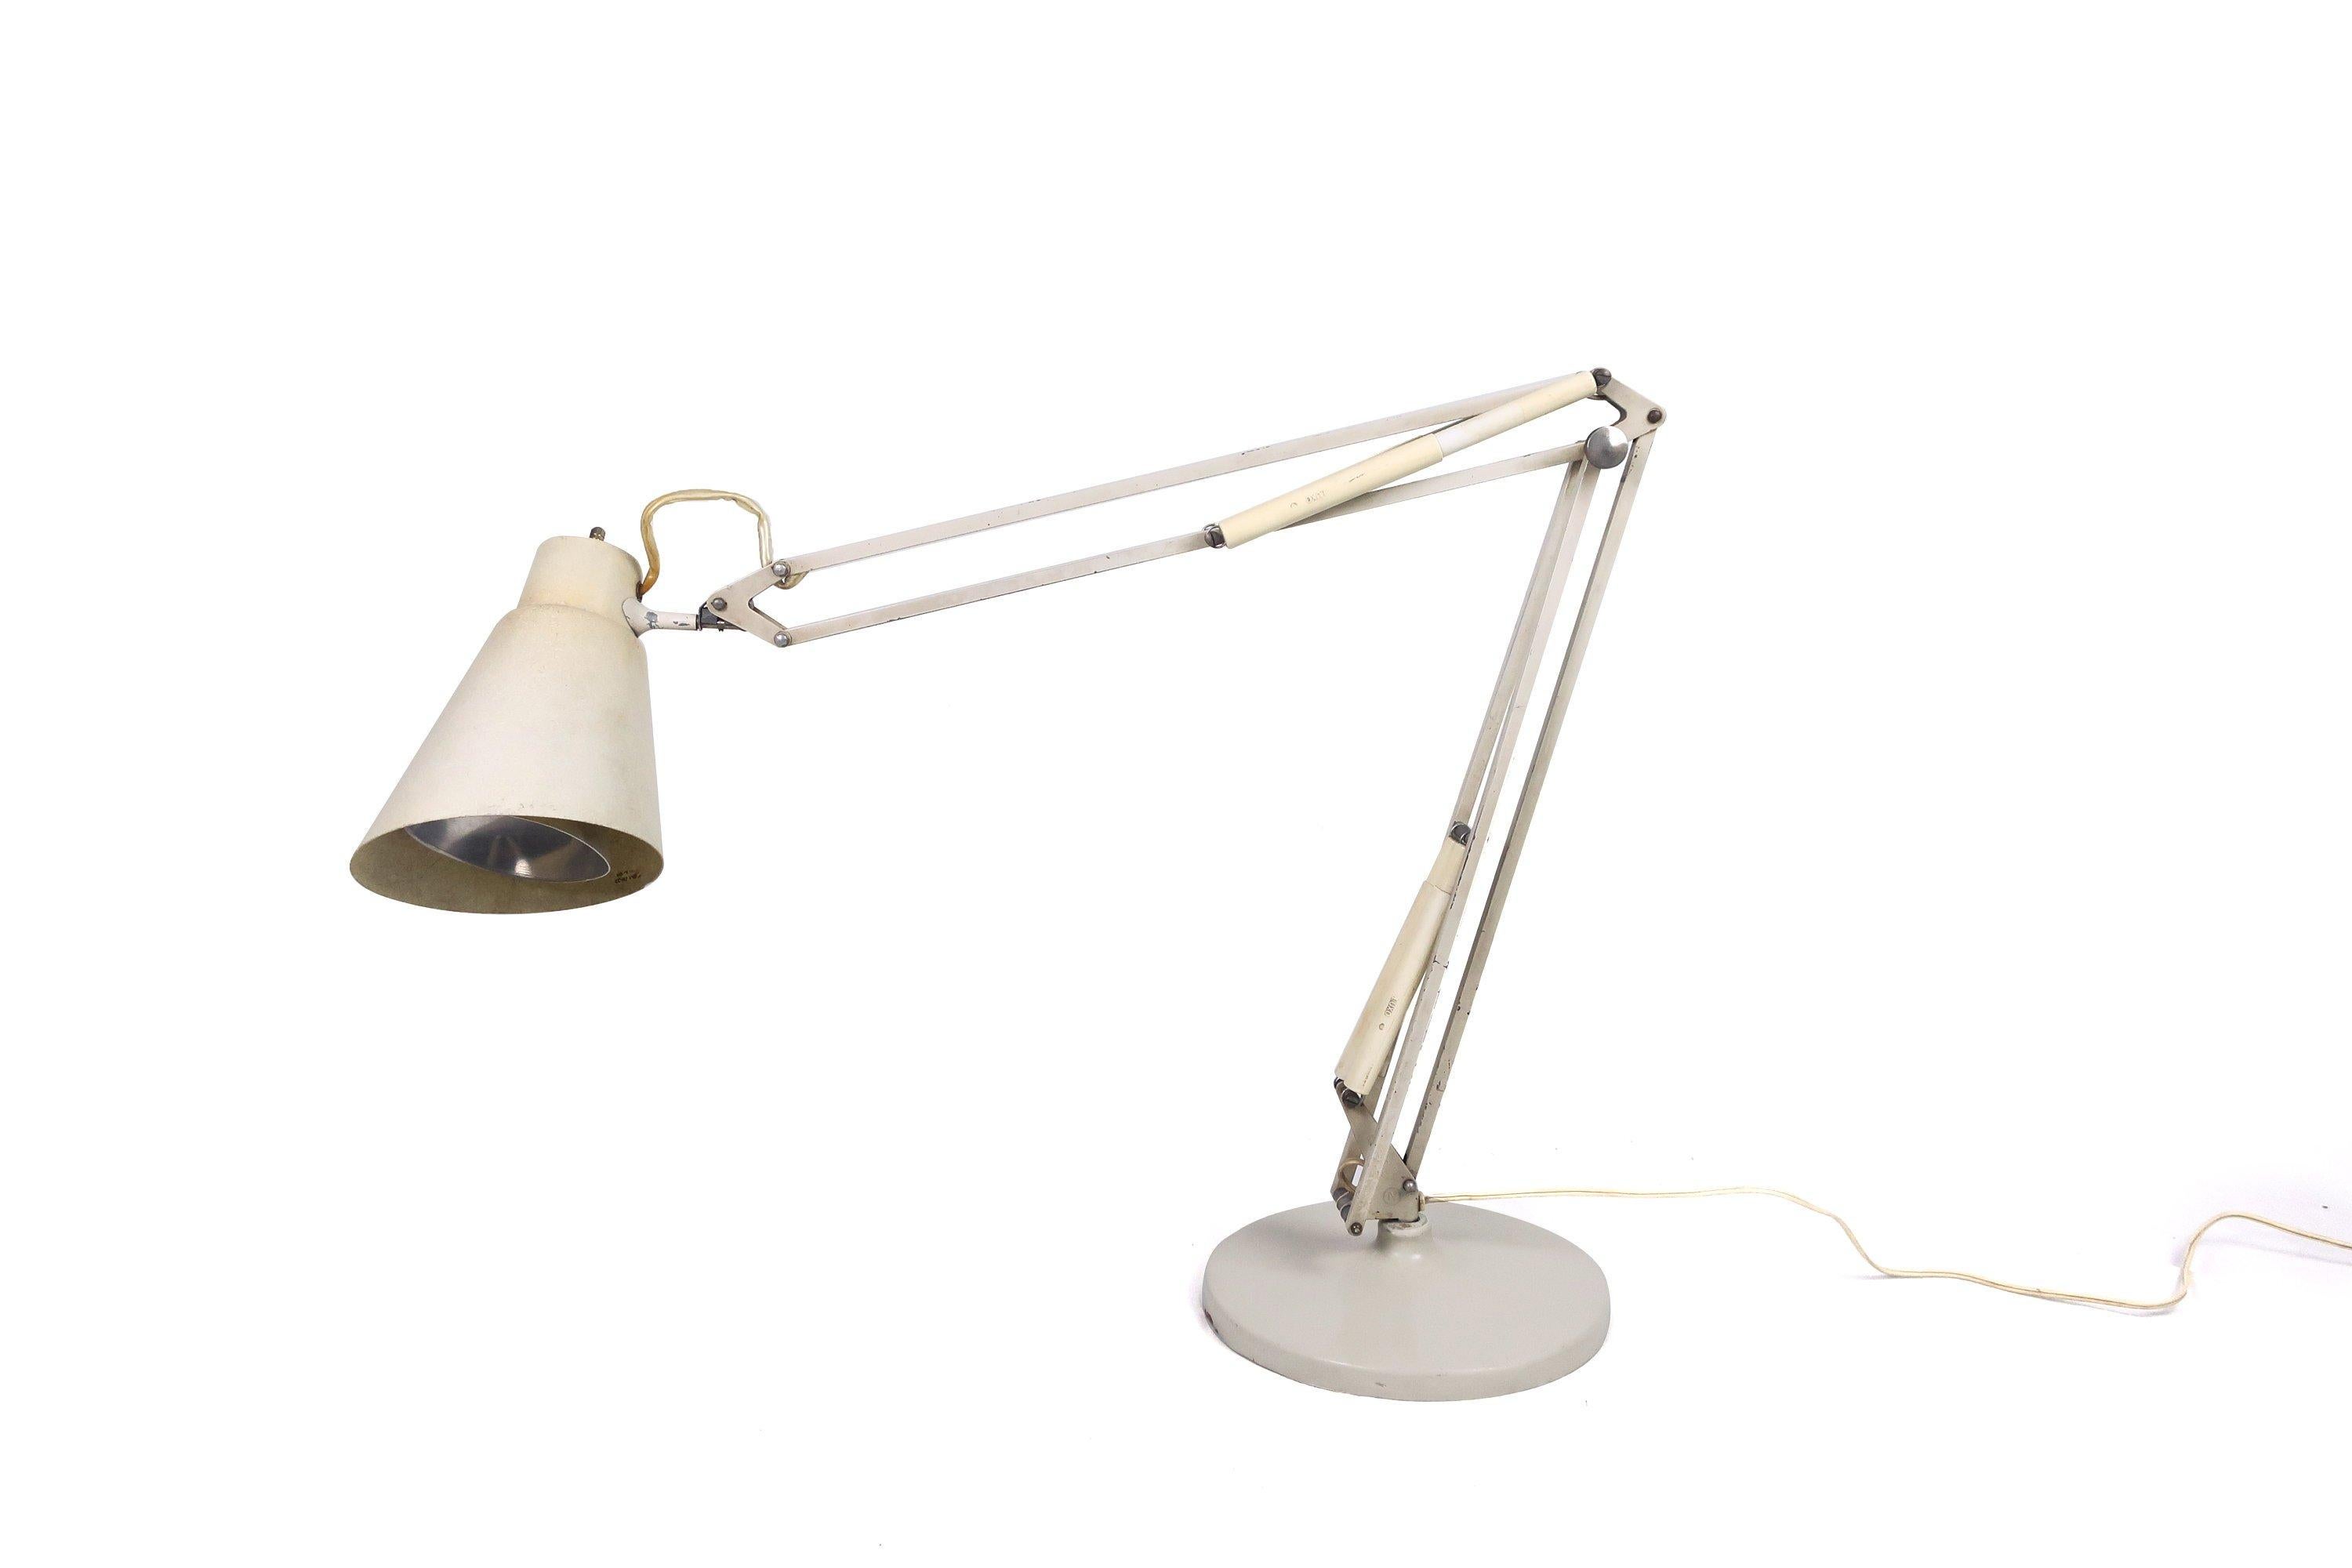 An early Luxo drafting lamp with white fiberglass shade, heavy white base, and white plastic “LUXO” embossed spring covers. Attributed to Jac Jacobsen. In vintage condition wth wear from use. Works perfectly!
 
Measures: 27” x 9.5” x 23” (extends